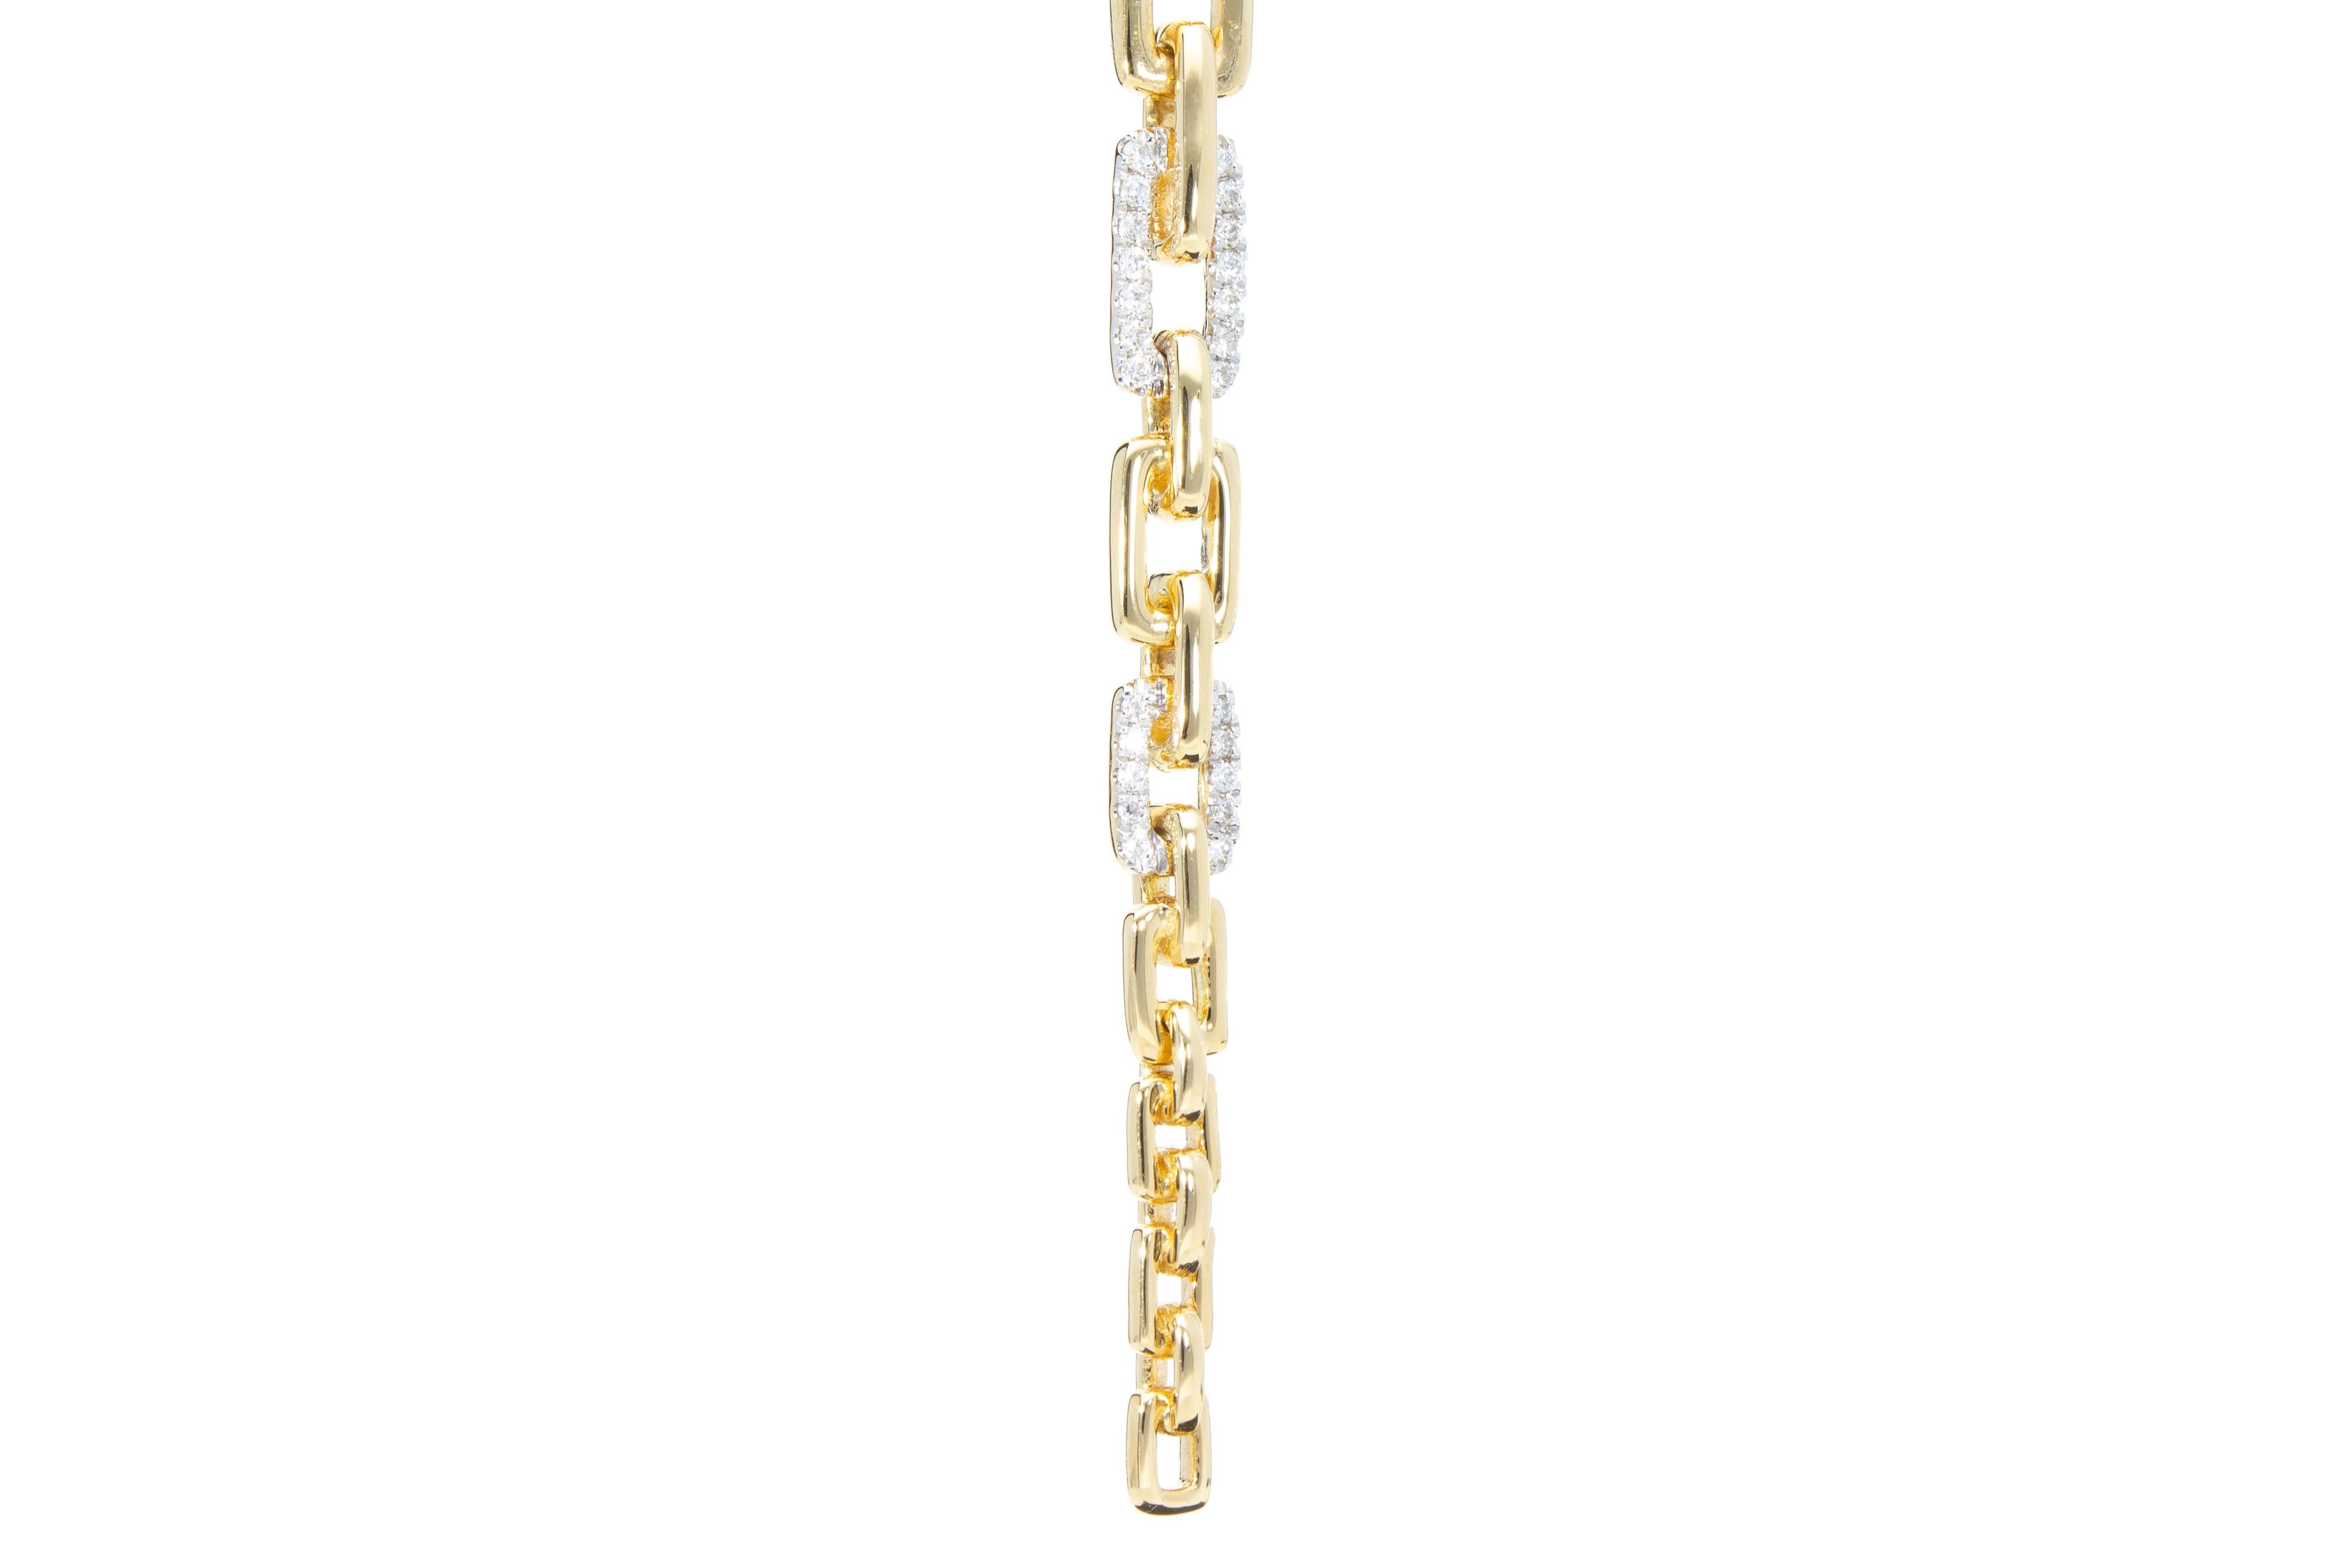 Diamonds Ct 0.35 Pendant Earrings with Rectangular Links 18k Gold Made in Italy For Sale 2